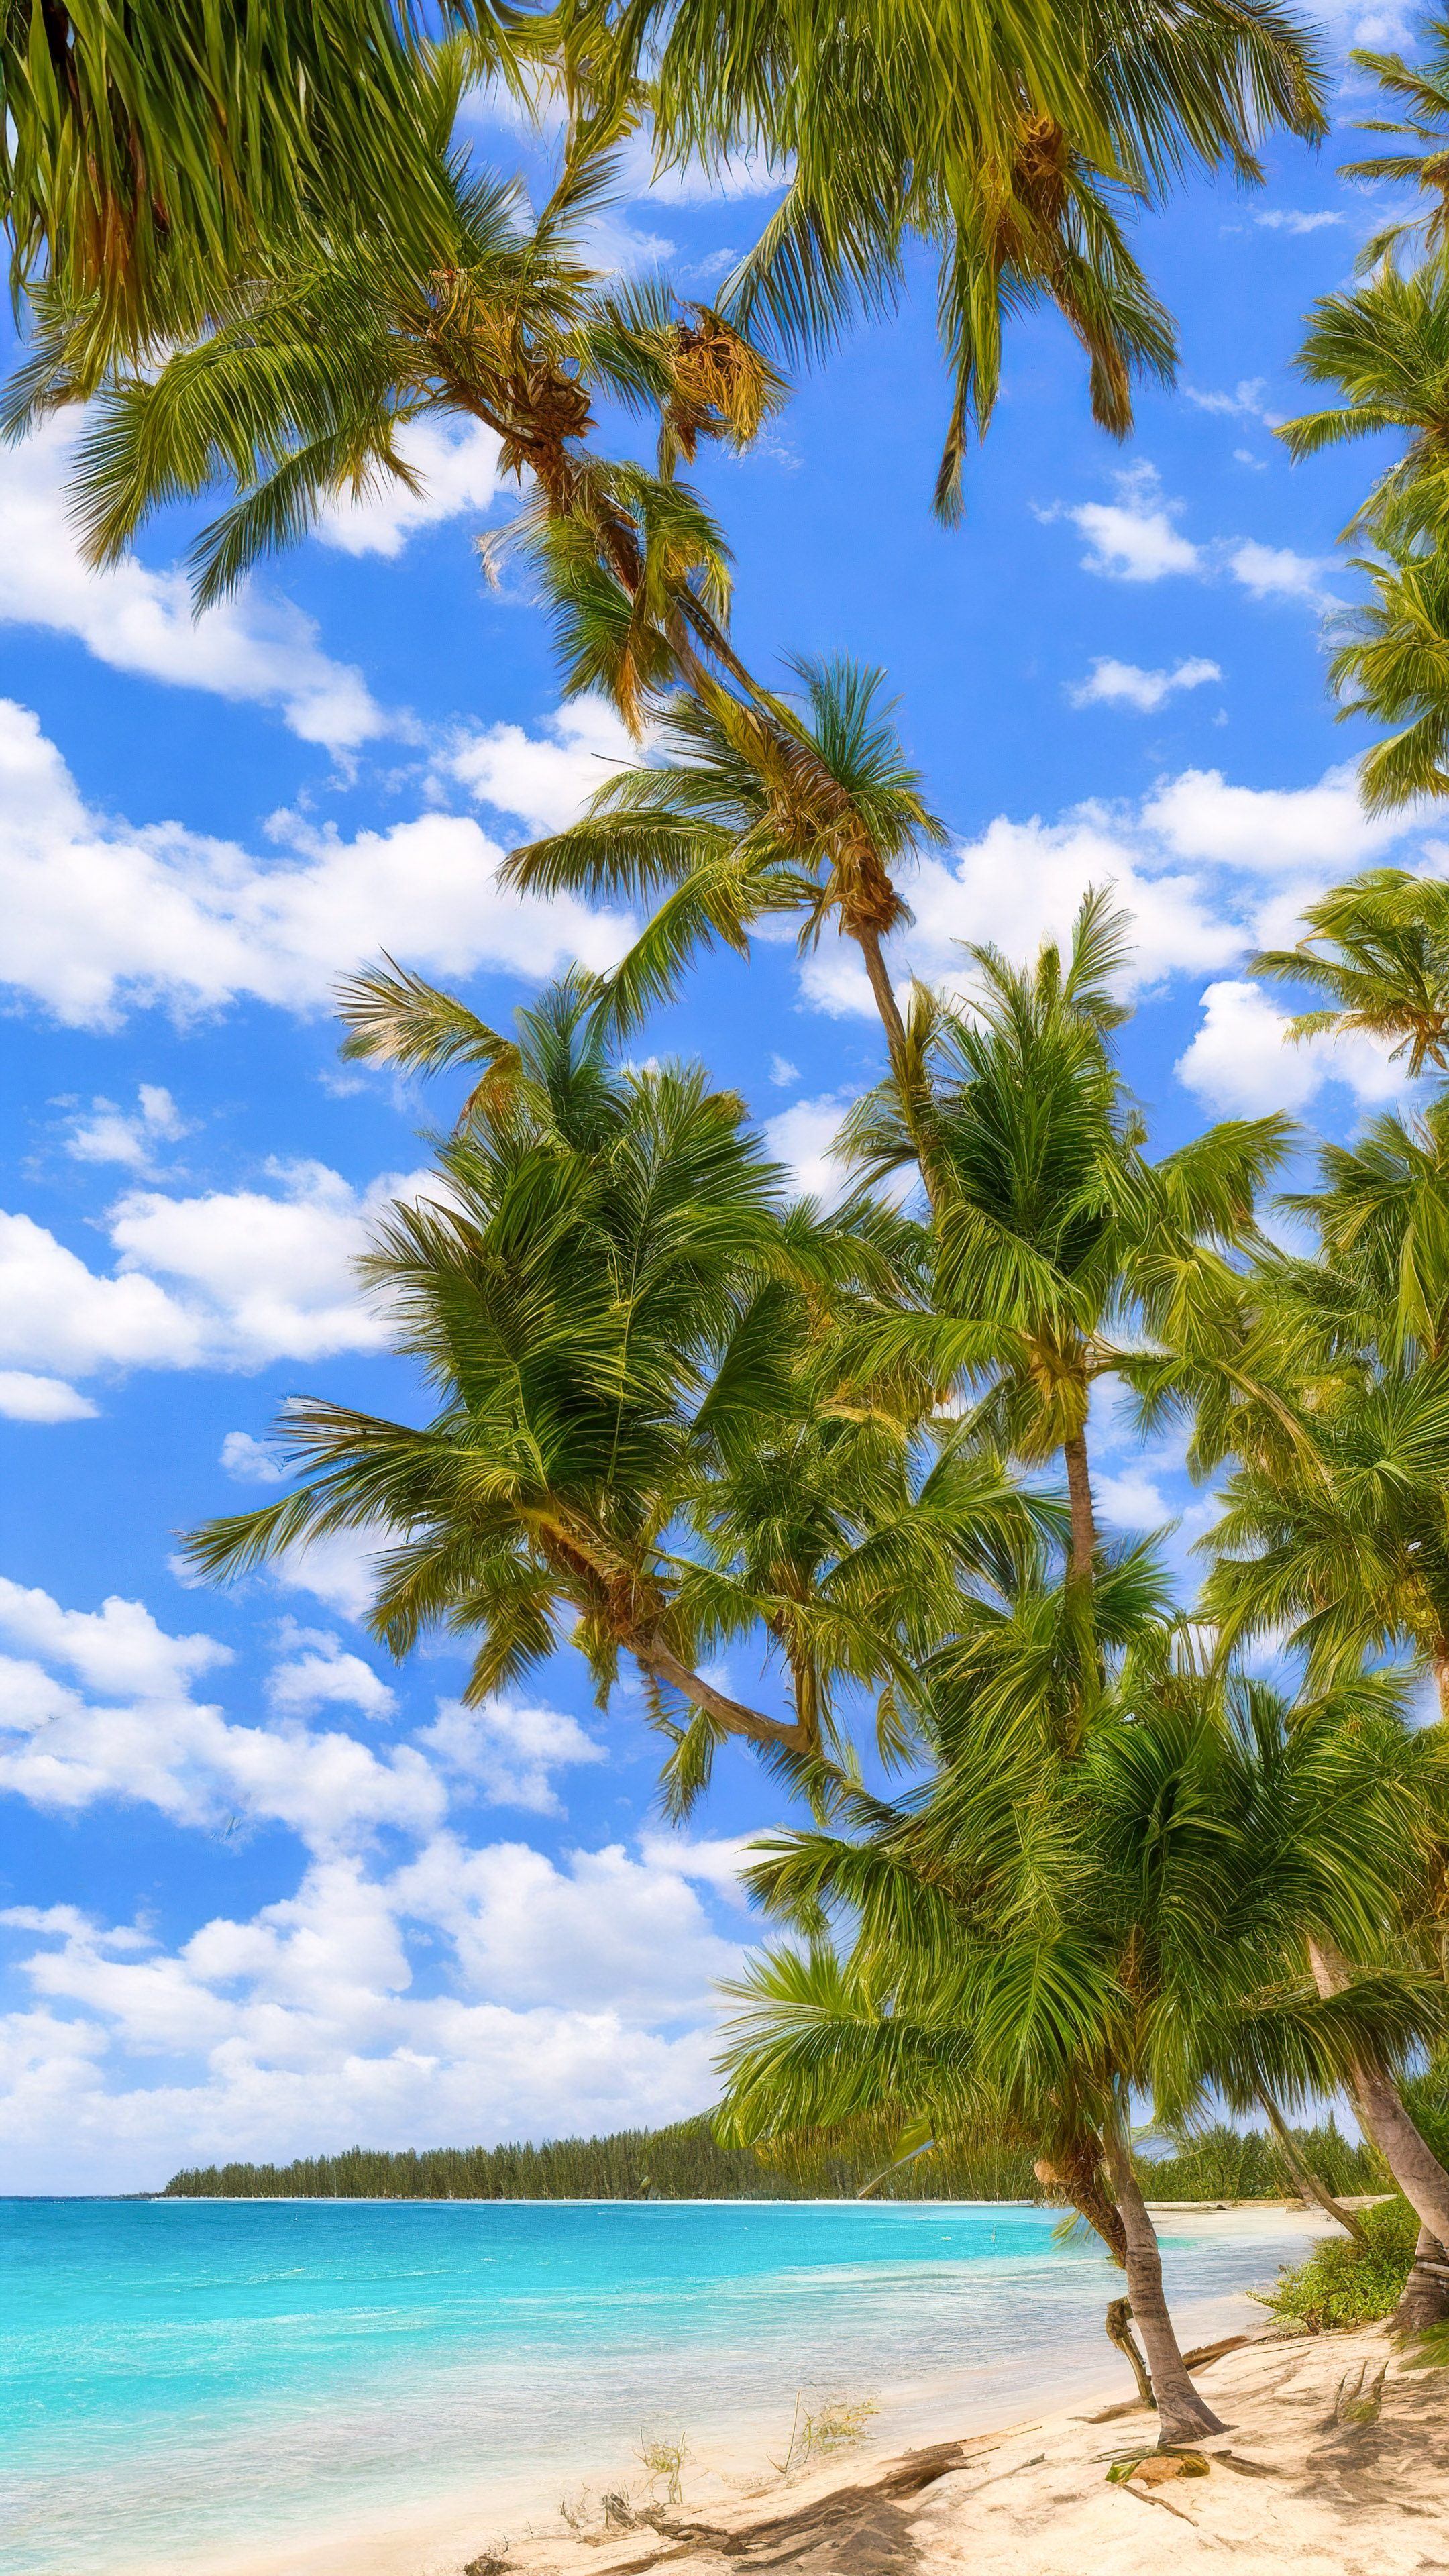 Bring the beauty of a tranquil beach with crystal-clear turquoise waters and palm trees swaying in the breeze to your mobile with our nature wallpaper in 4K.